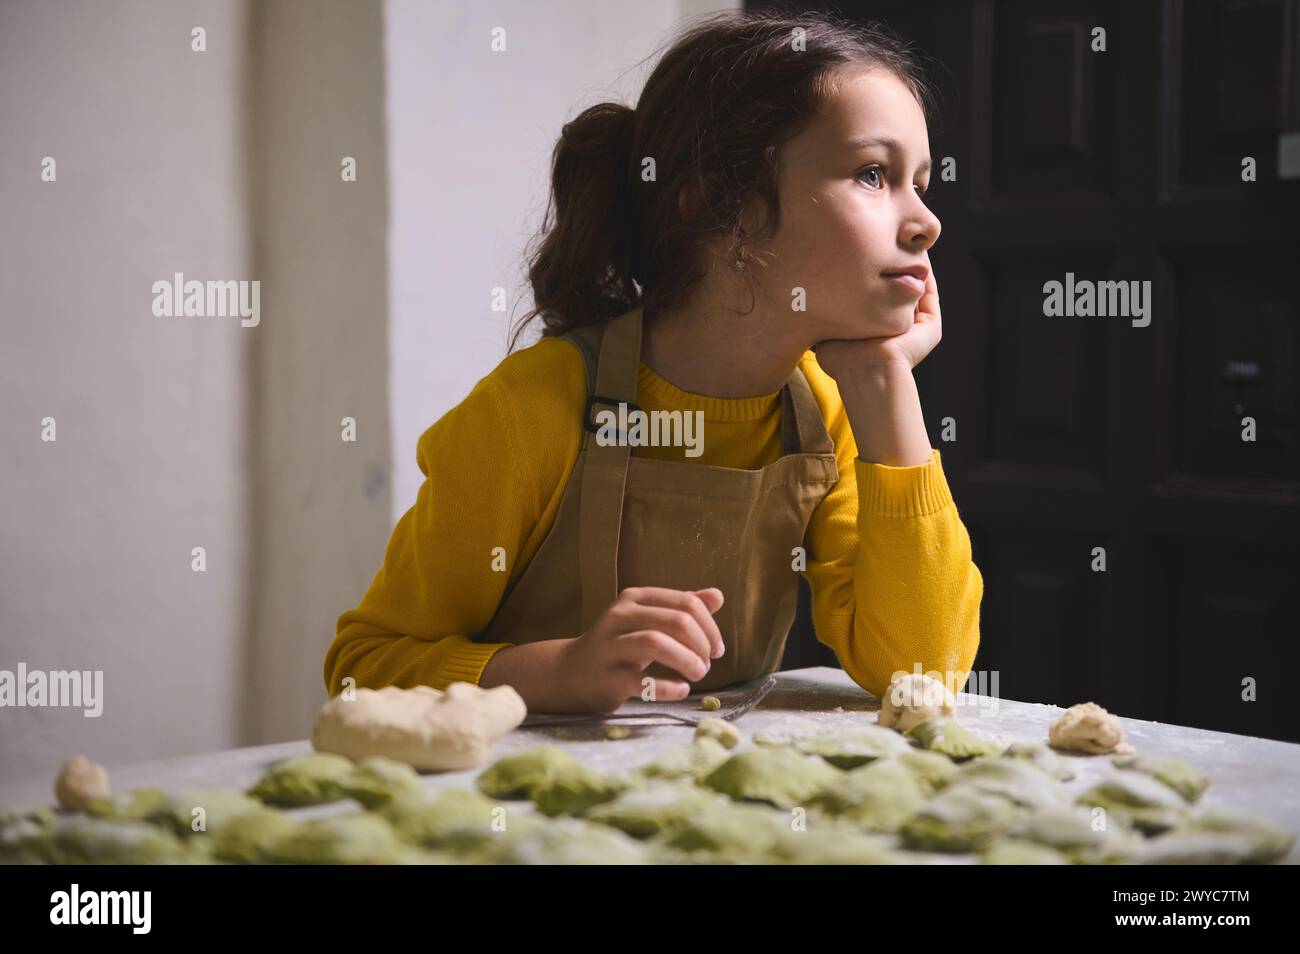 Authentic portrait of Caucasian beautiful little girl 6 y.o, in beige chef apron, dreamily looking away, standing at floured table with molded dumplin Stock Photo